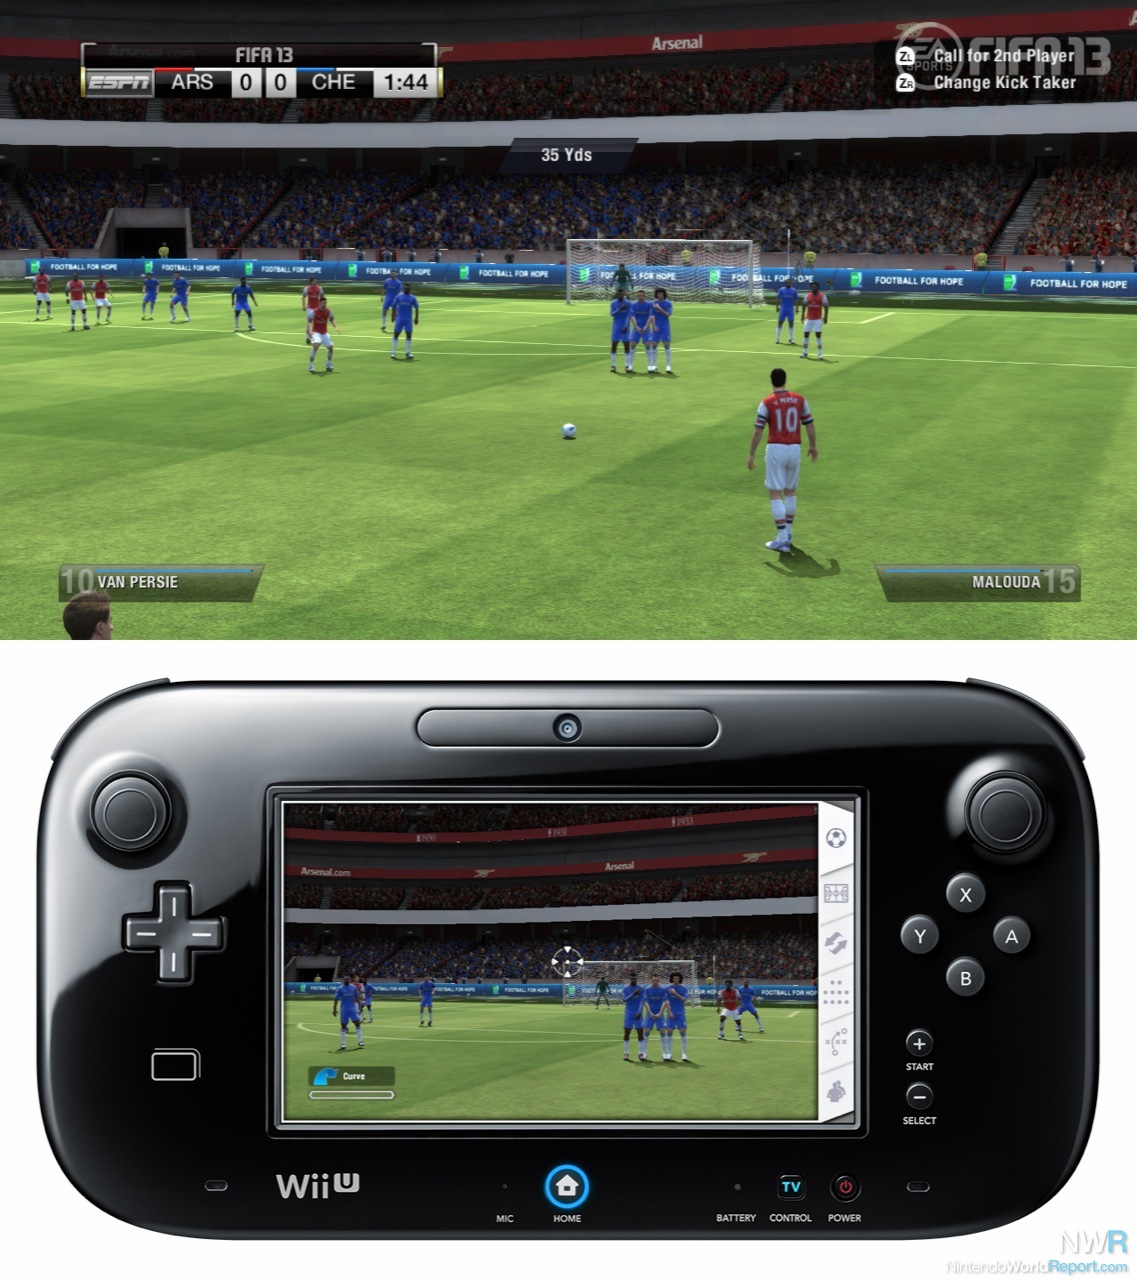 New FIFA 13 Wii U Details Emerge, Will Be a Launch Title and Feature 'Key  Graphical Improvements' Over Other Platforms - News - Nintendo World Report